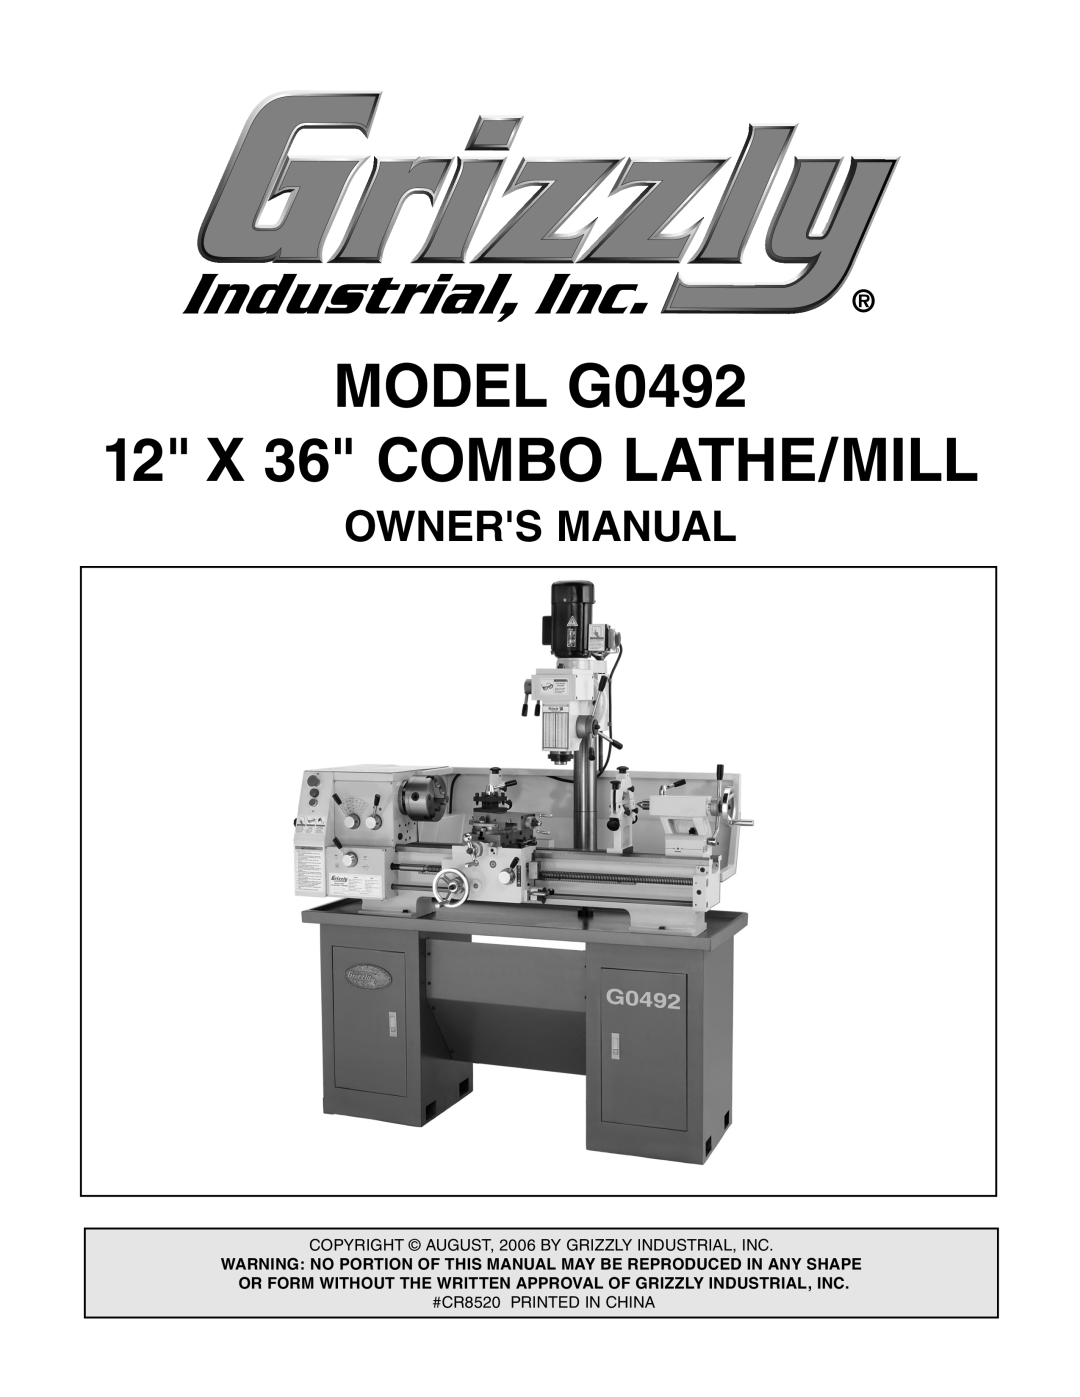 Grizzly manual Owners Manual, MODEL G0492 12 X 36 COMBO LATHE/MILL 